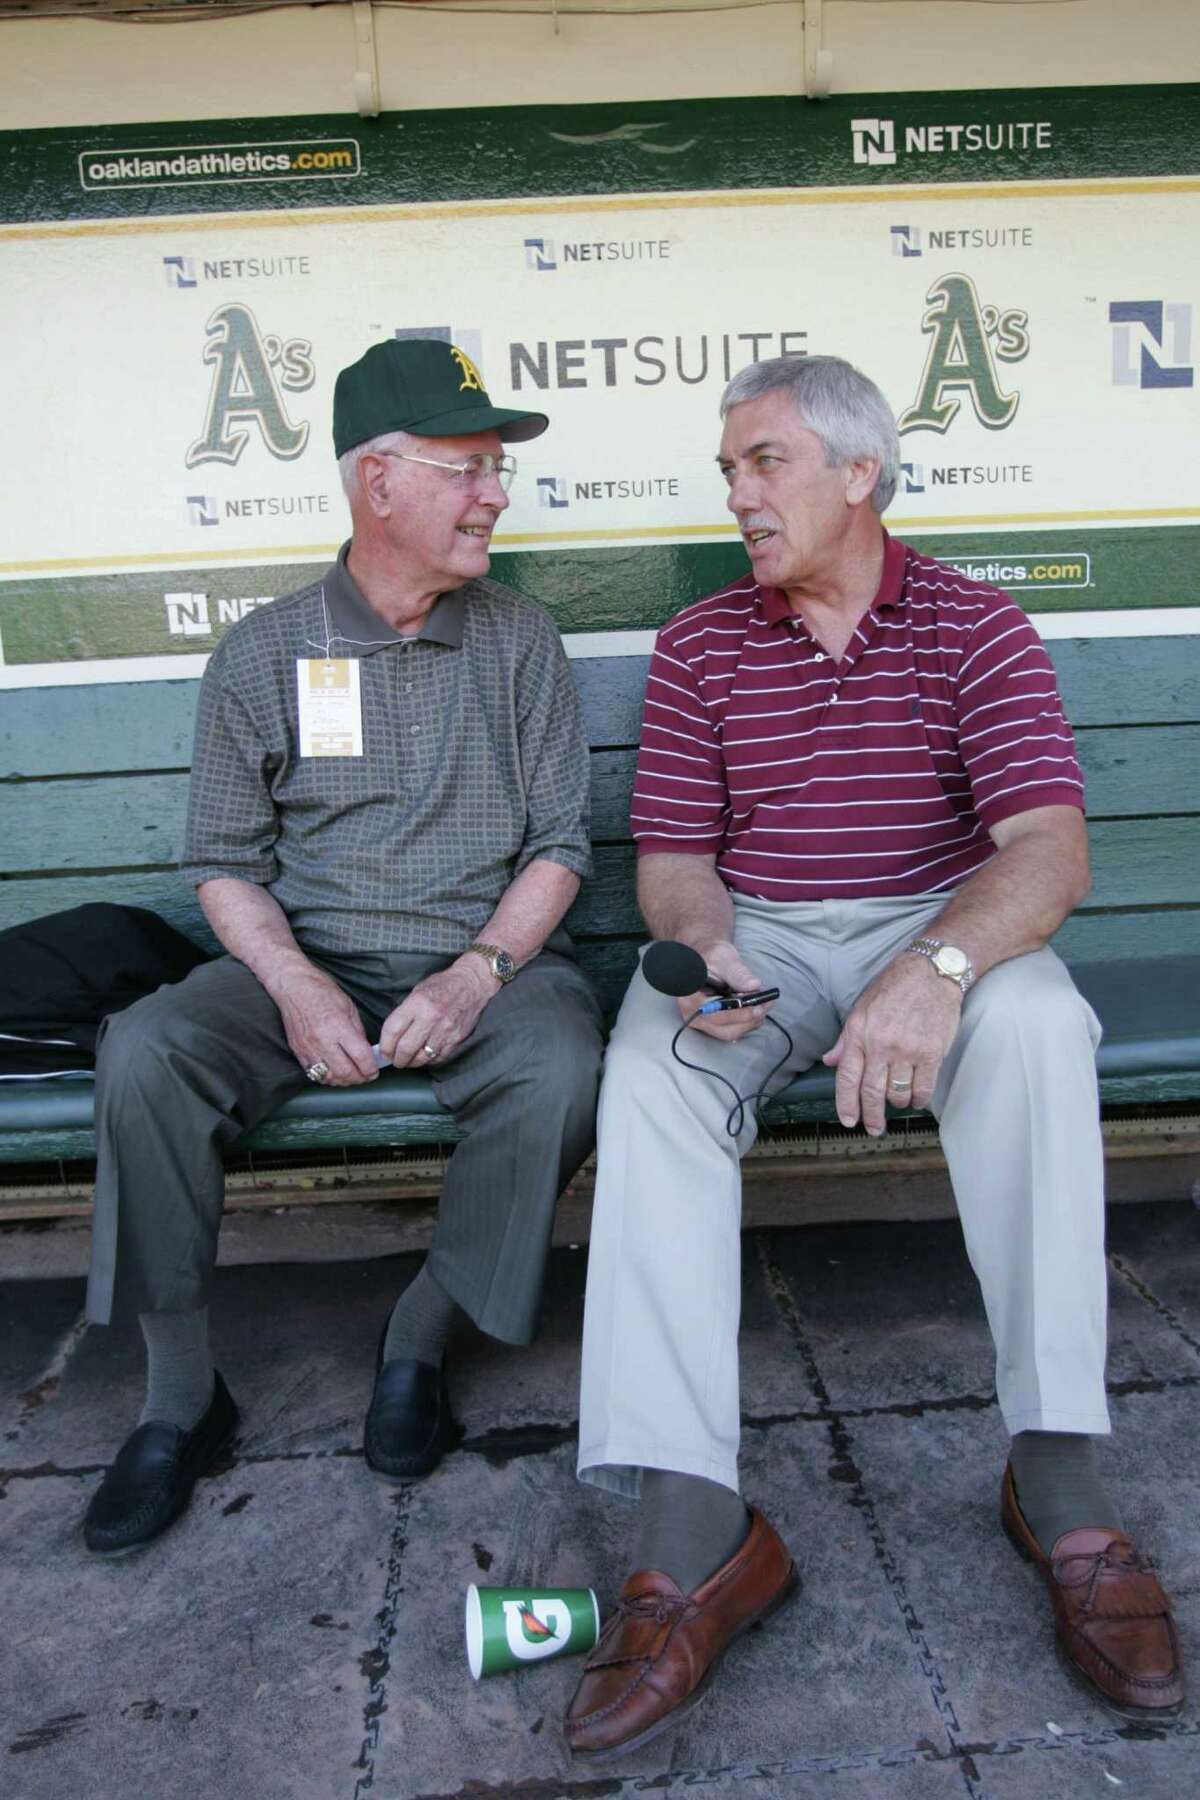 OAKLAND, CA - JUNE 23: Monte Moore and Ray Fosse in the dugout prior to the Oakland Athletics game against the San Francisco Giants at the Oakland Coliseum on June 23, 2009 in Oakland, California. The Giants defeated the Athletics 4-1. (Photo by Michael Zagaris/Getty Images)